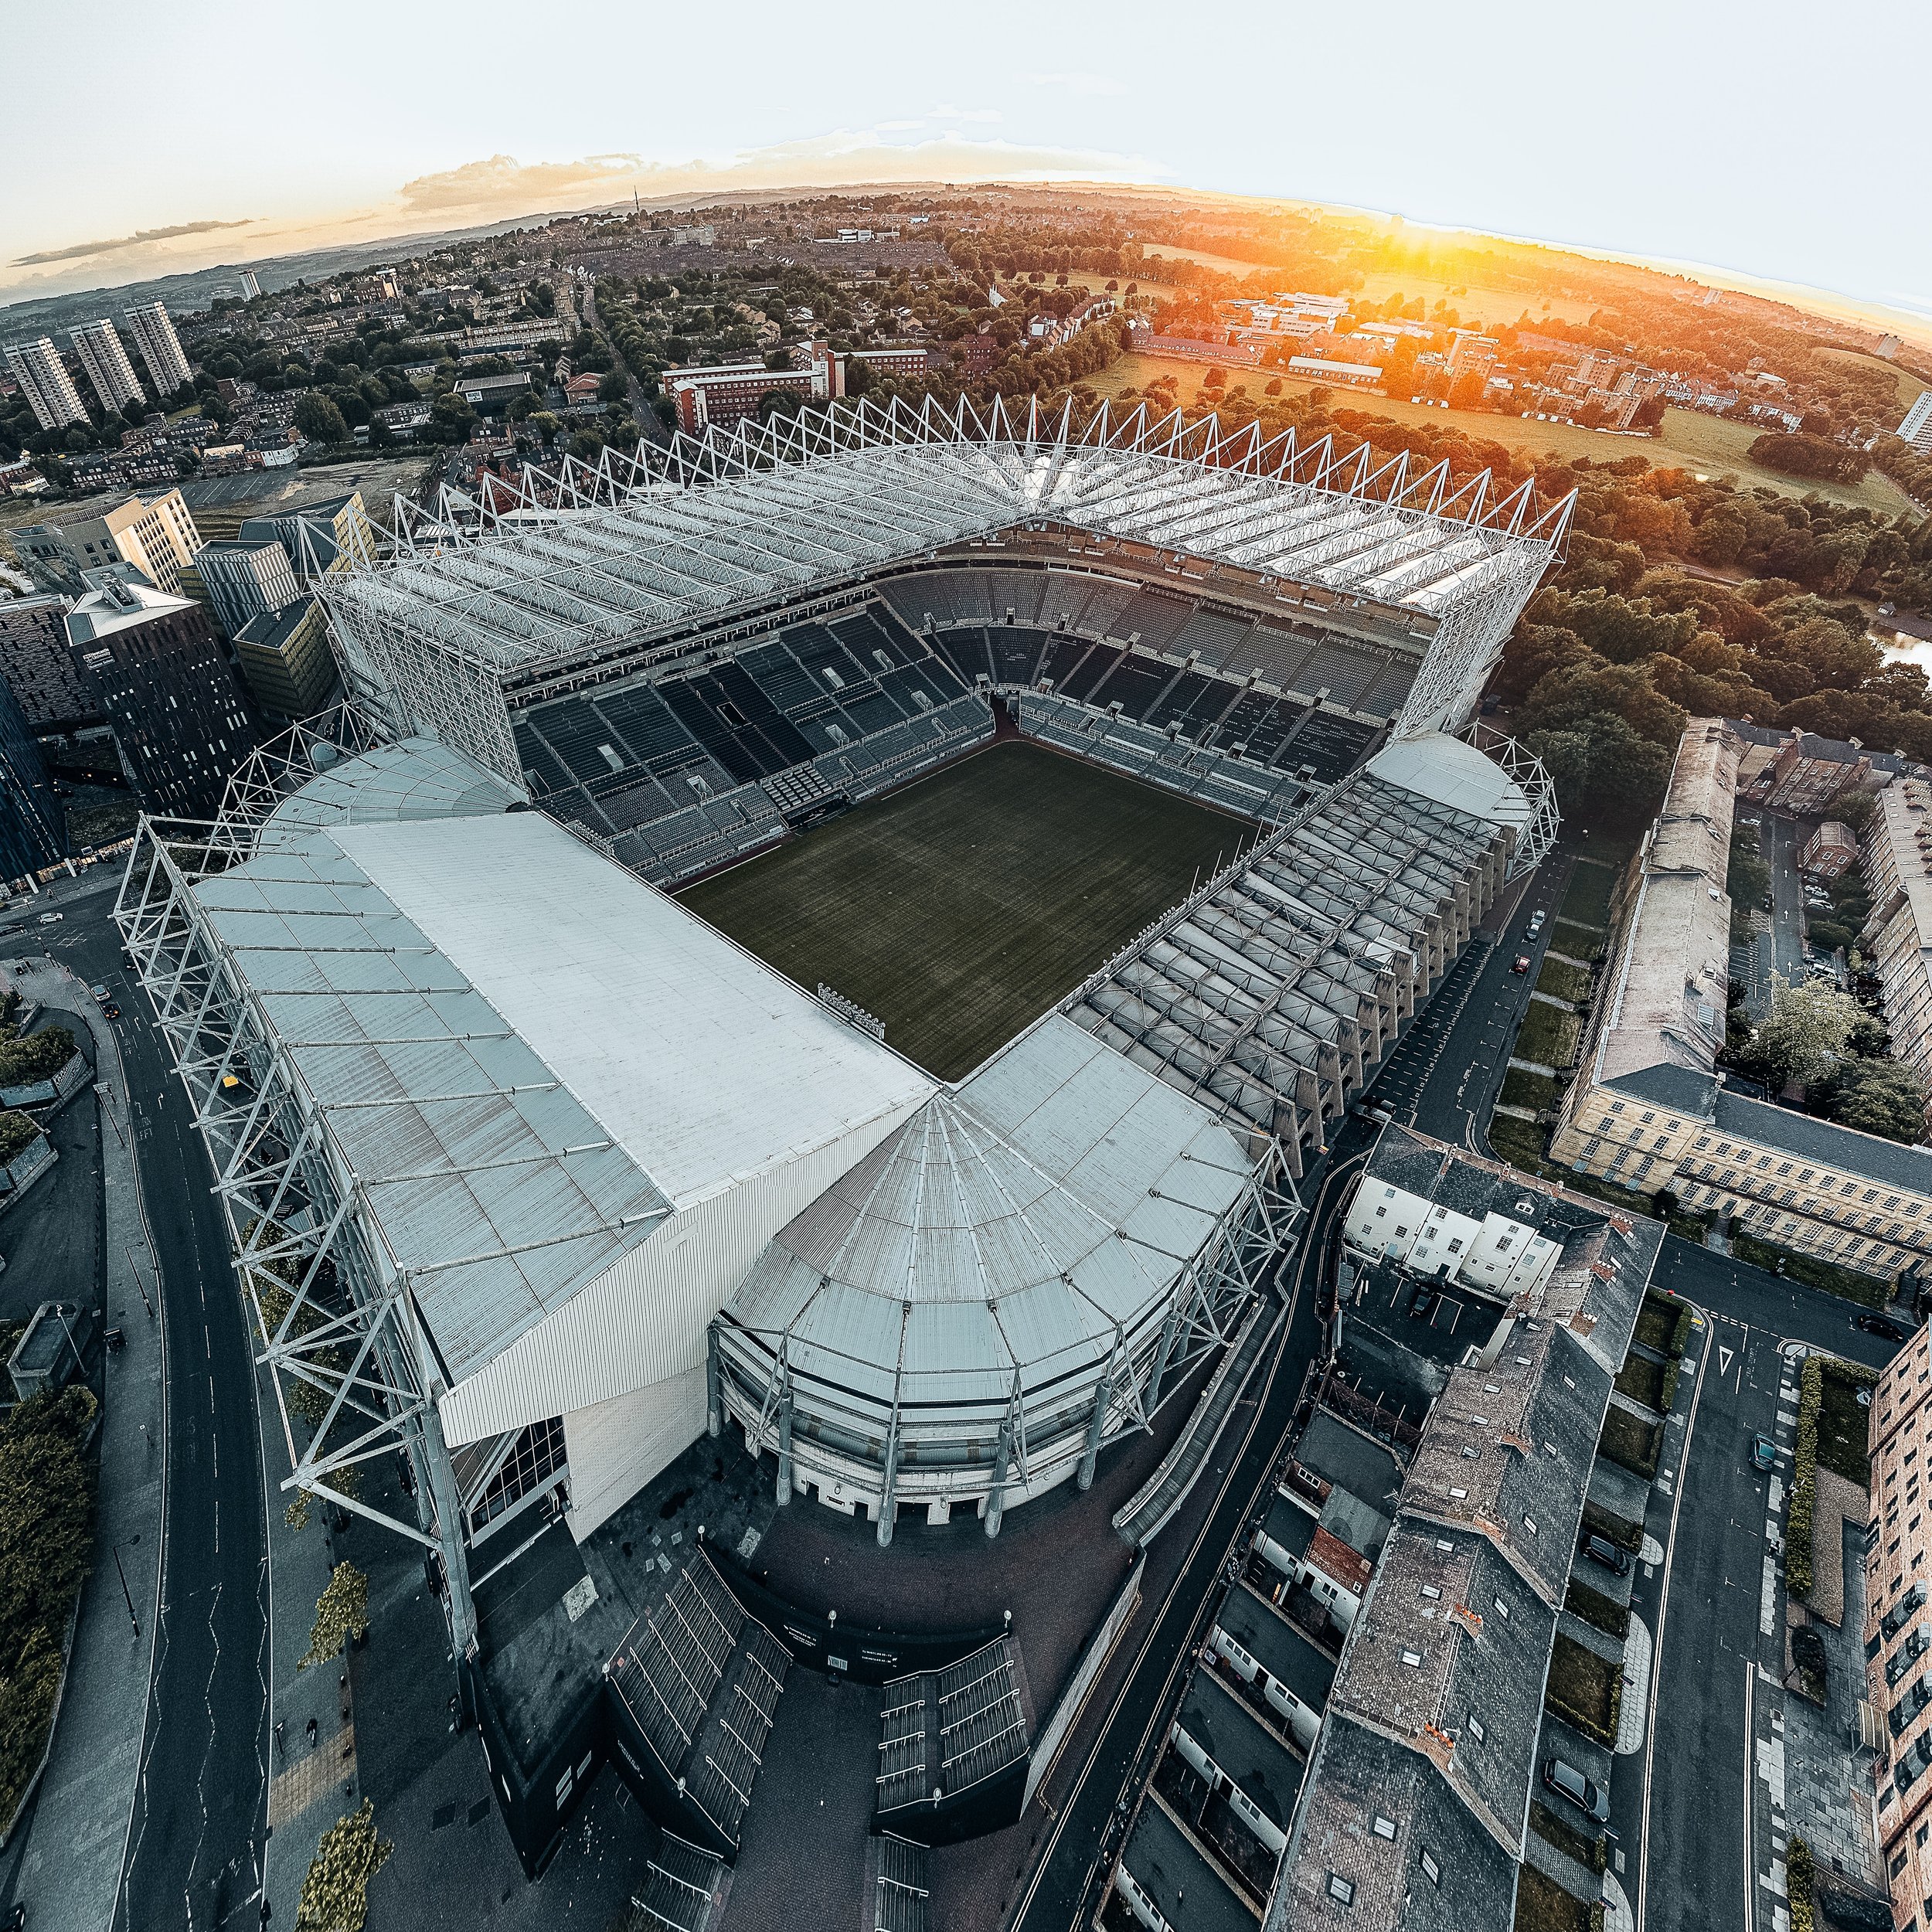 S T .  J A M E S &rsquo;  P A R K
Very excited to be returning to St James&rsquo; Park this weekend to see @nufc take on @spursofficial! Howay the lads! 🖤🤍 
We won&rsquo;t talk about the seagulls who wanted to eat my drone as I was taking this shot